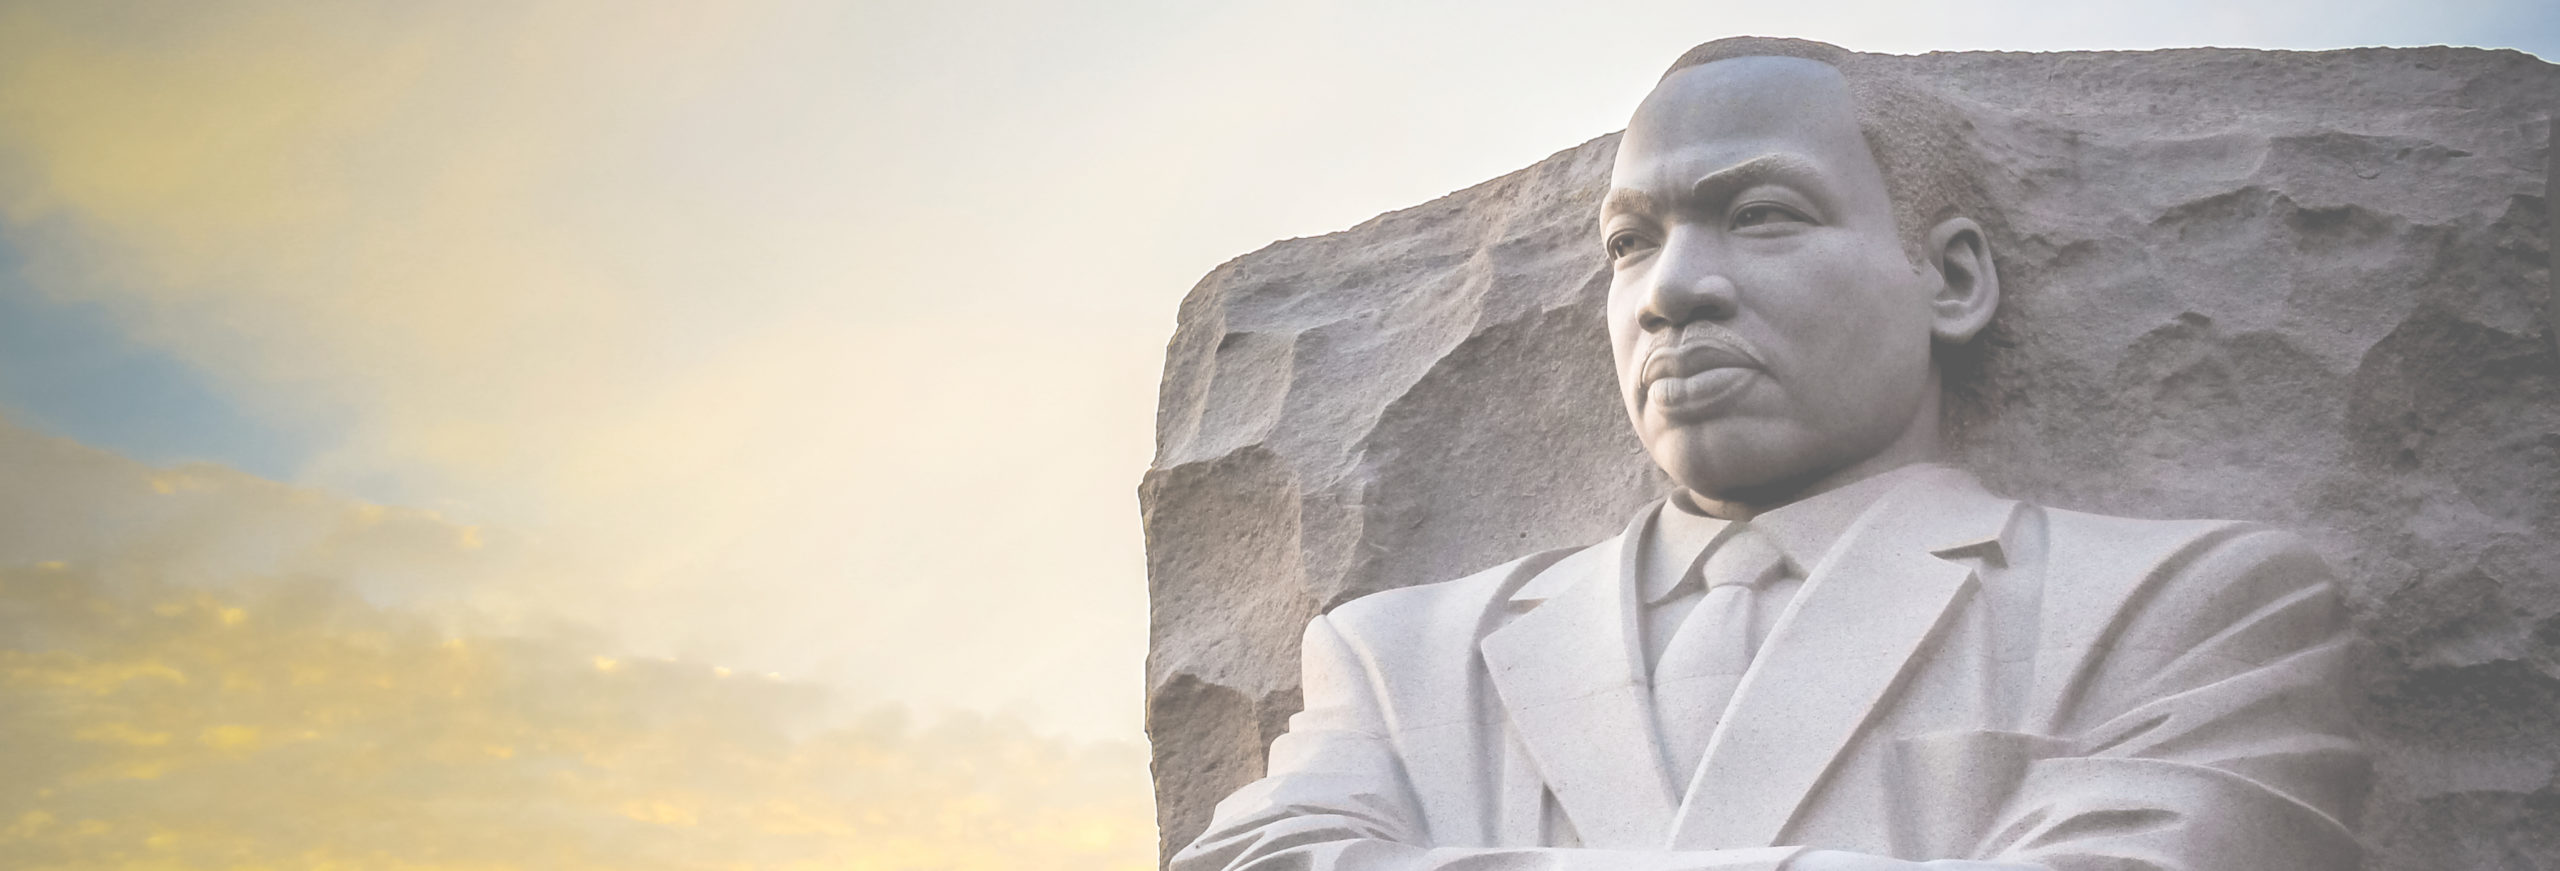 statue of Martin Luther King, Jr.